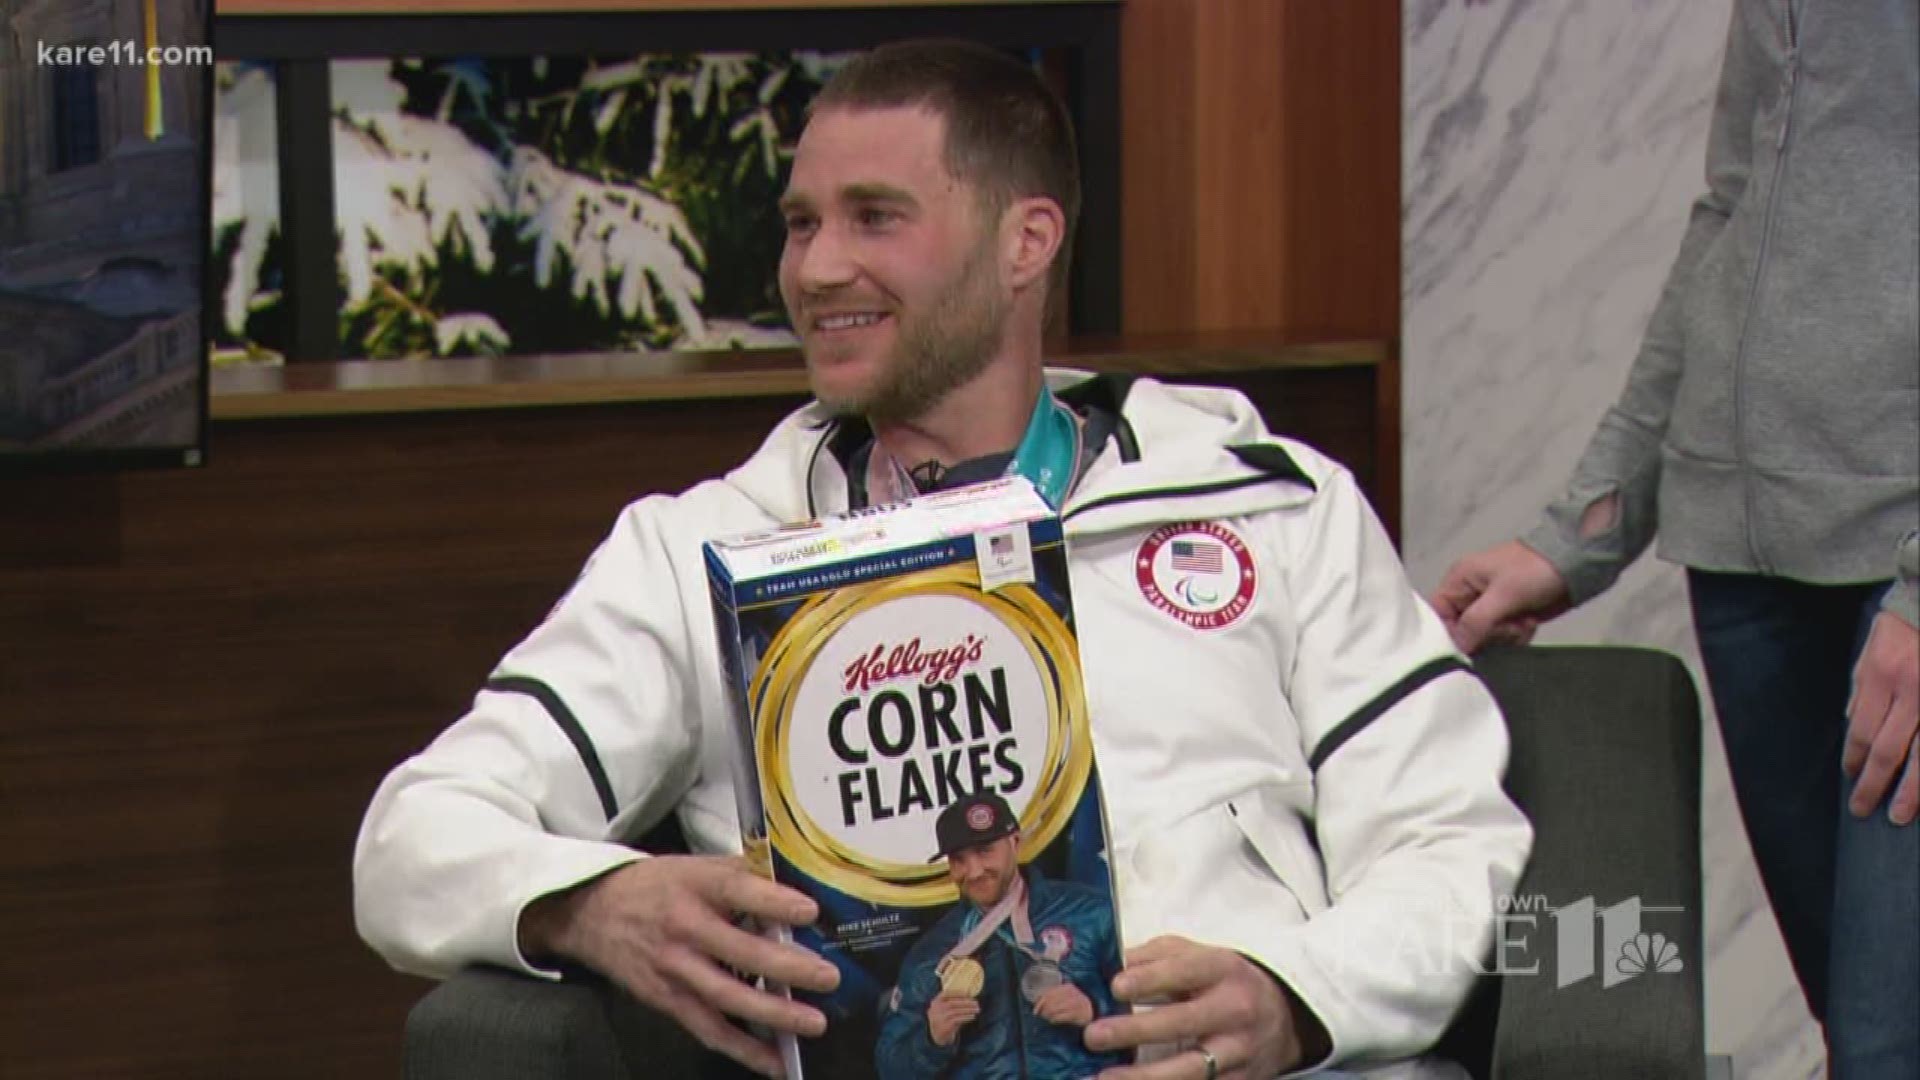 Kellogg's exclusively revealed the limited-edition Corn Flakes box featuring Minnesotan Mike Schultz, Paralympian and gold medalist on KARE 11.